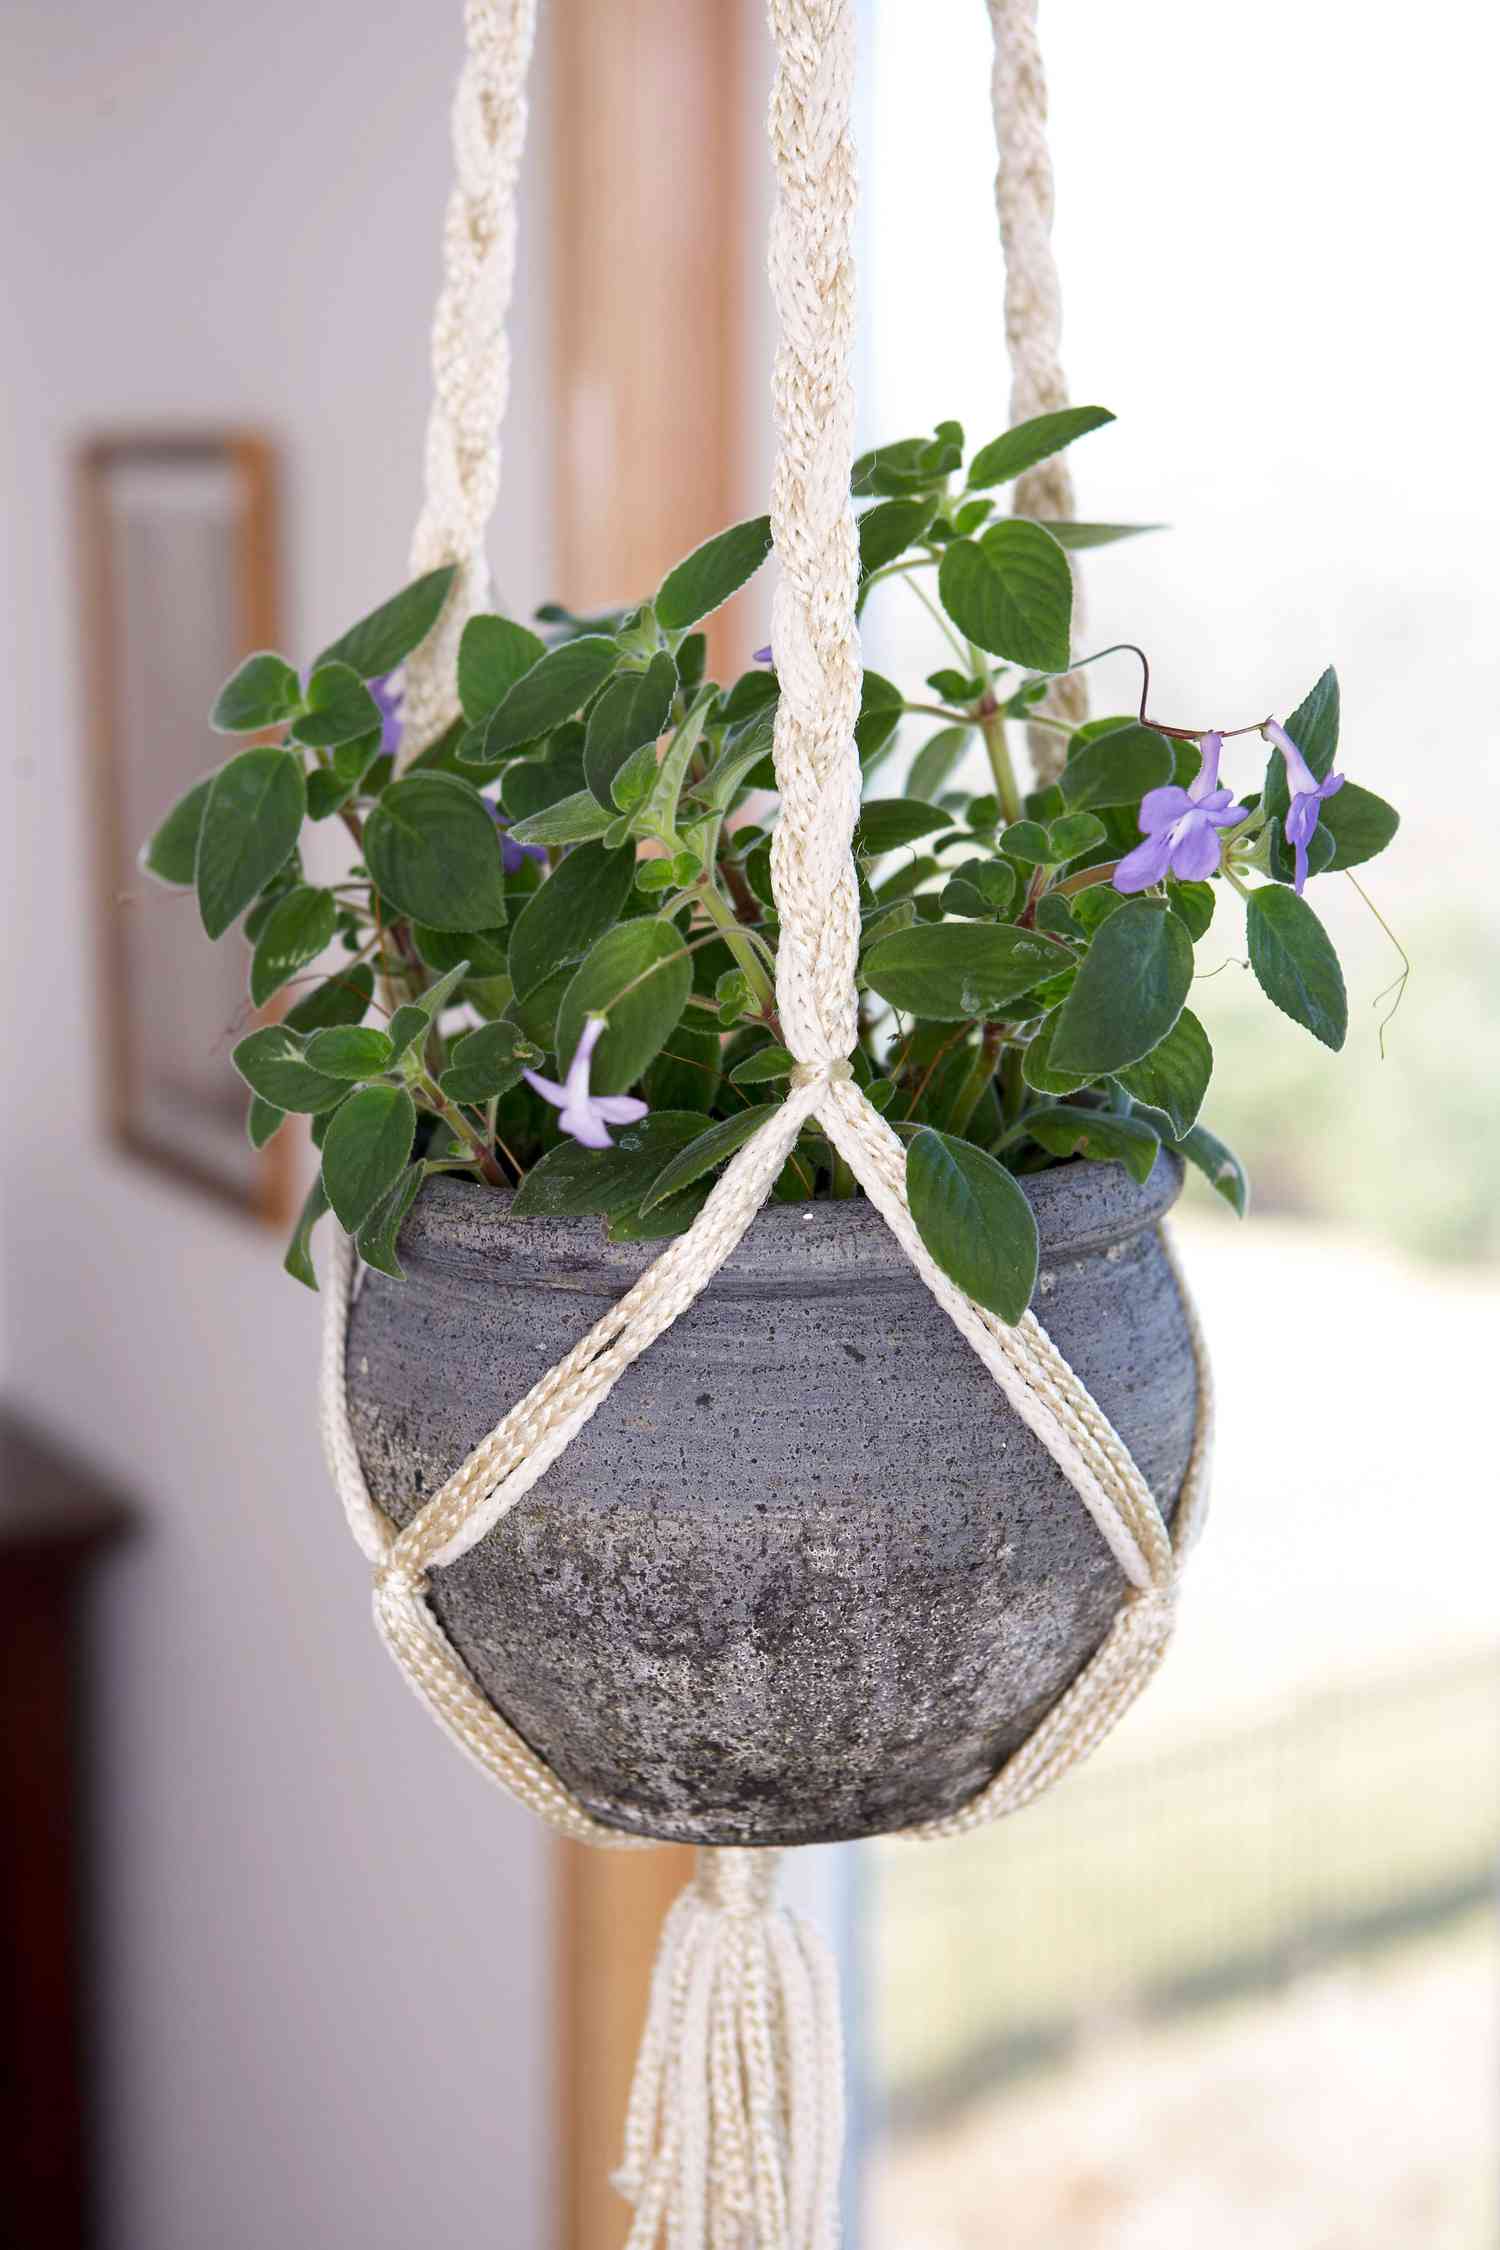 24 flowering plants that can grow indoors